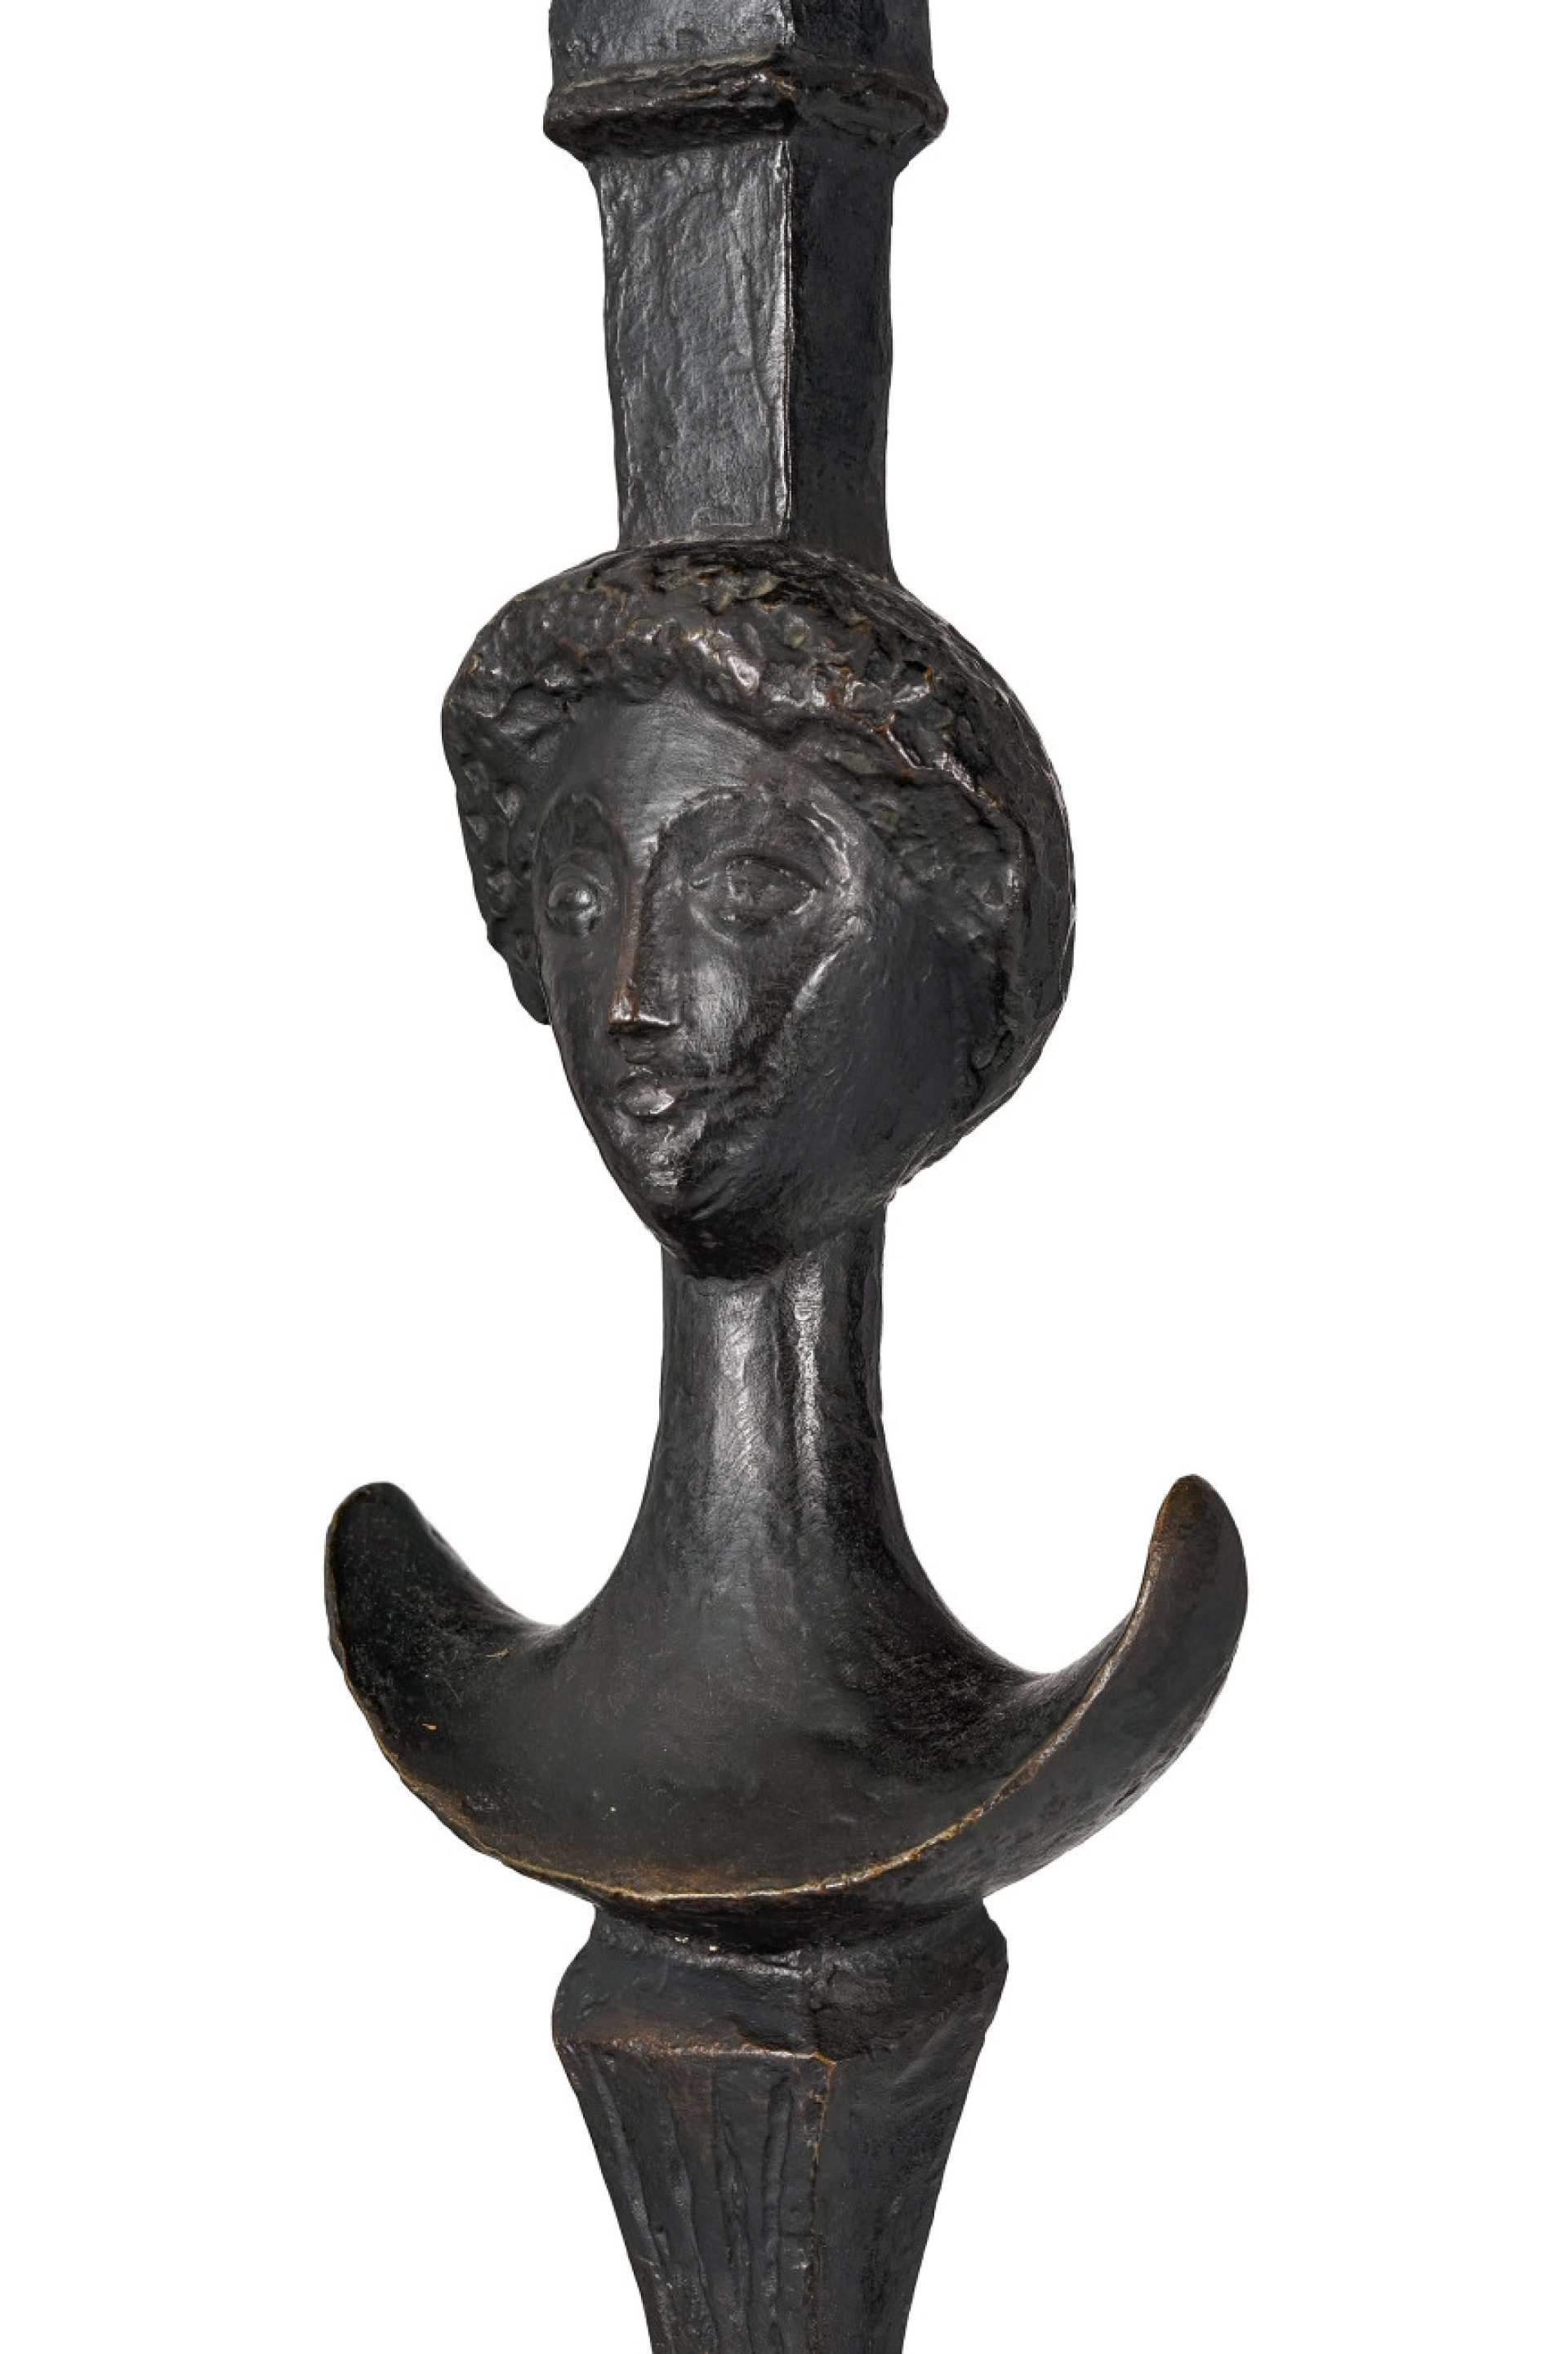 ’Figure’ Floor Lamp (’Tête de femme’), 1933 impressed and monogrammed AG 02 by LBERTO GIACOMETTI (1901-1966) the Giacometti Foundation, Paris Height: 153.5 cm bronze 